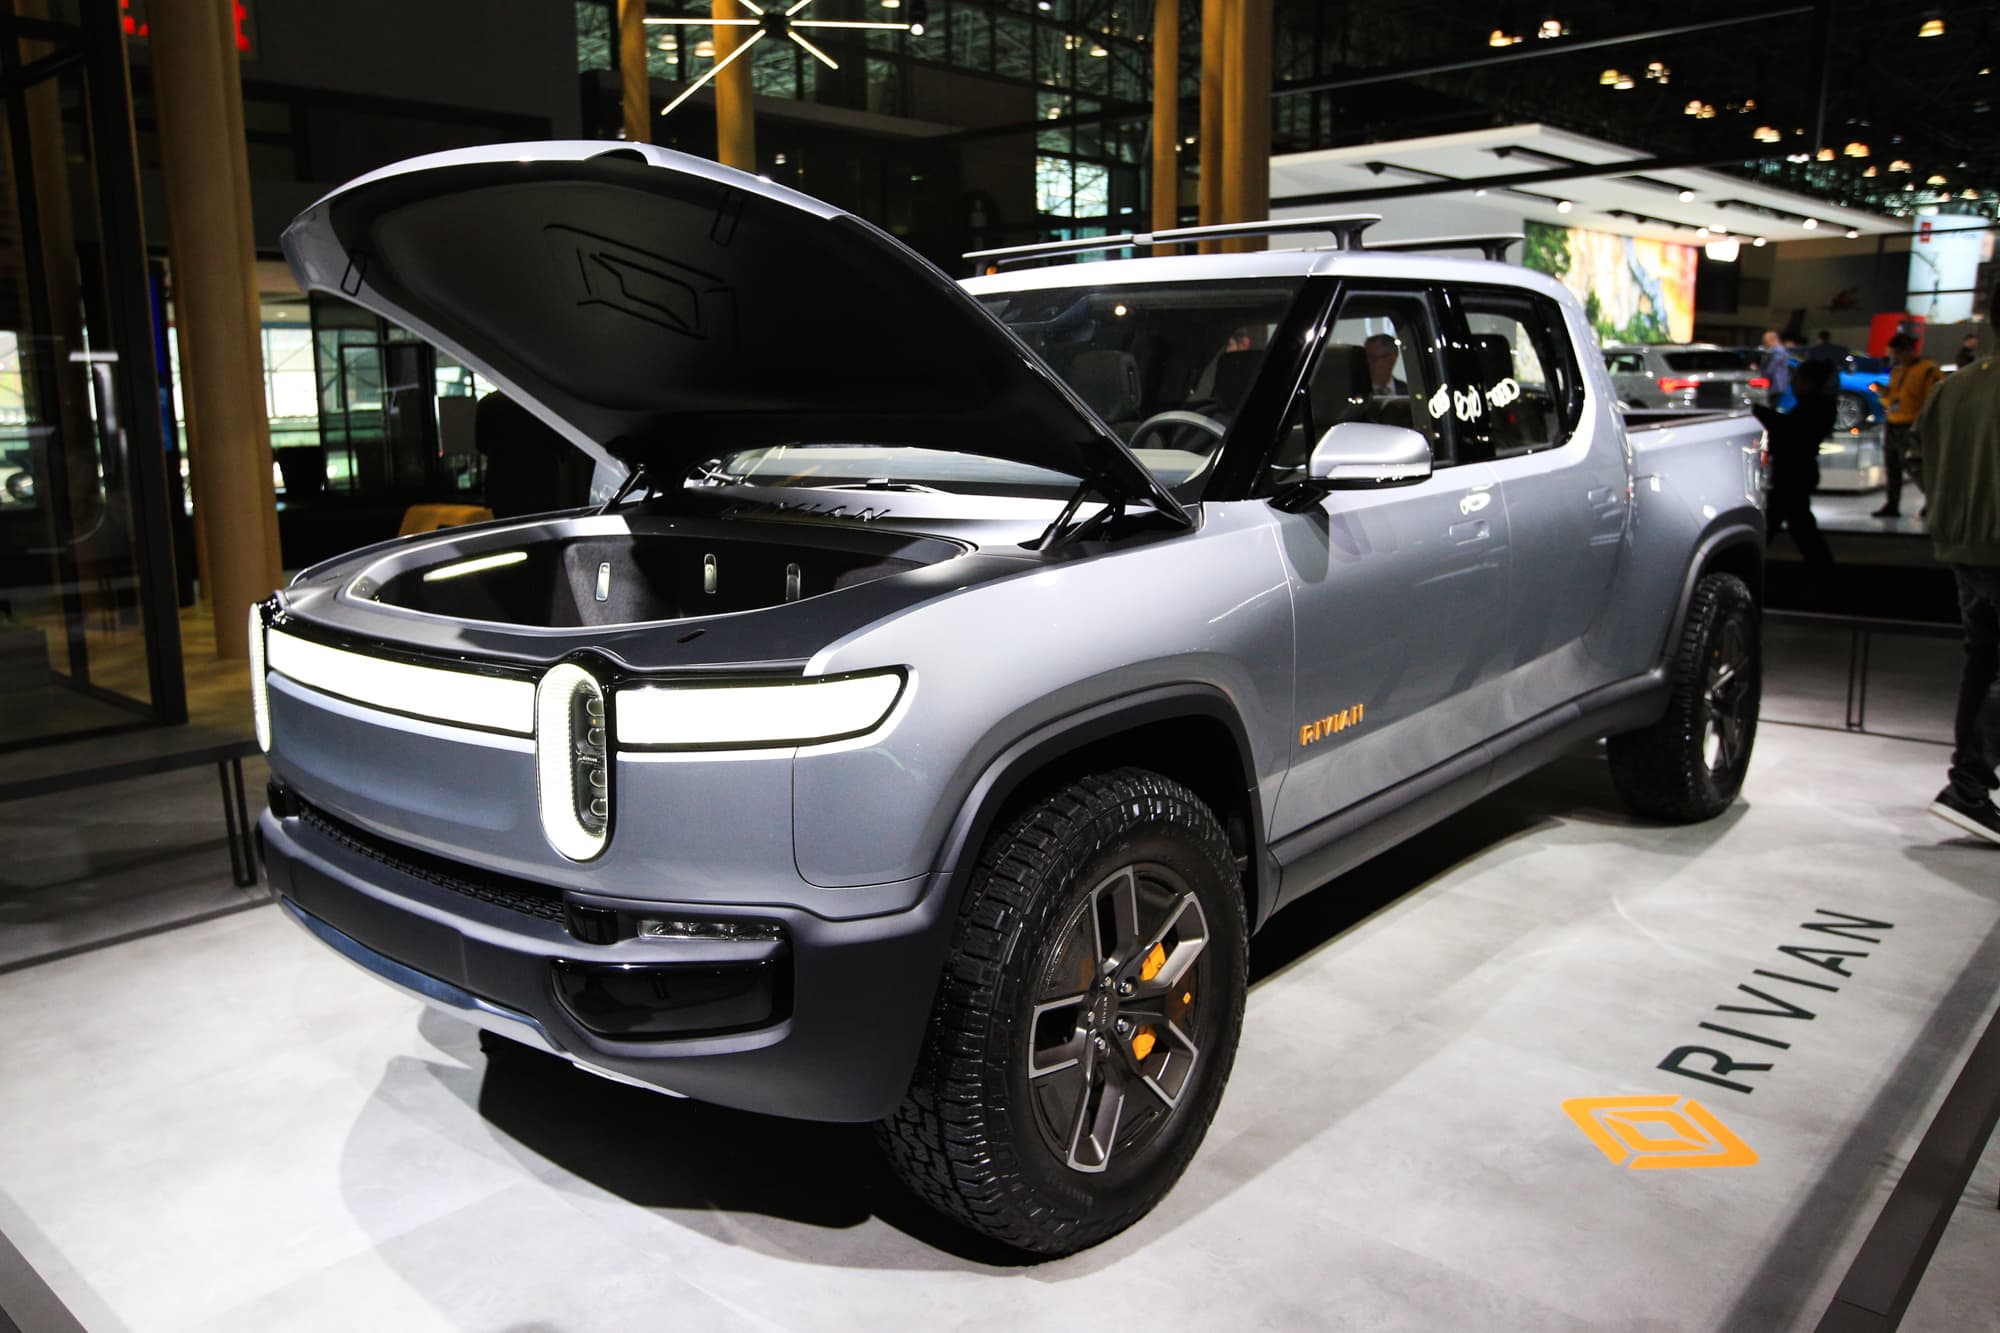 Exec says Rivian fired her for concerns about ‘toxic bro culture’